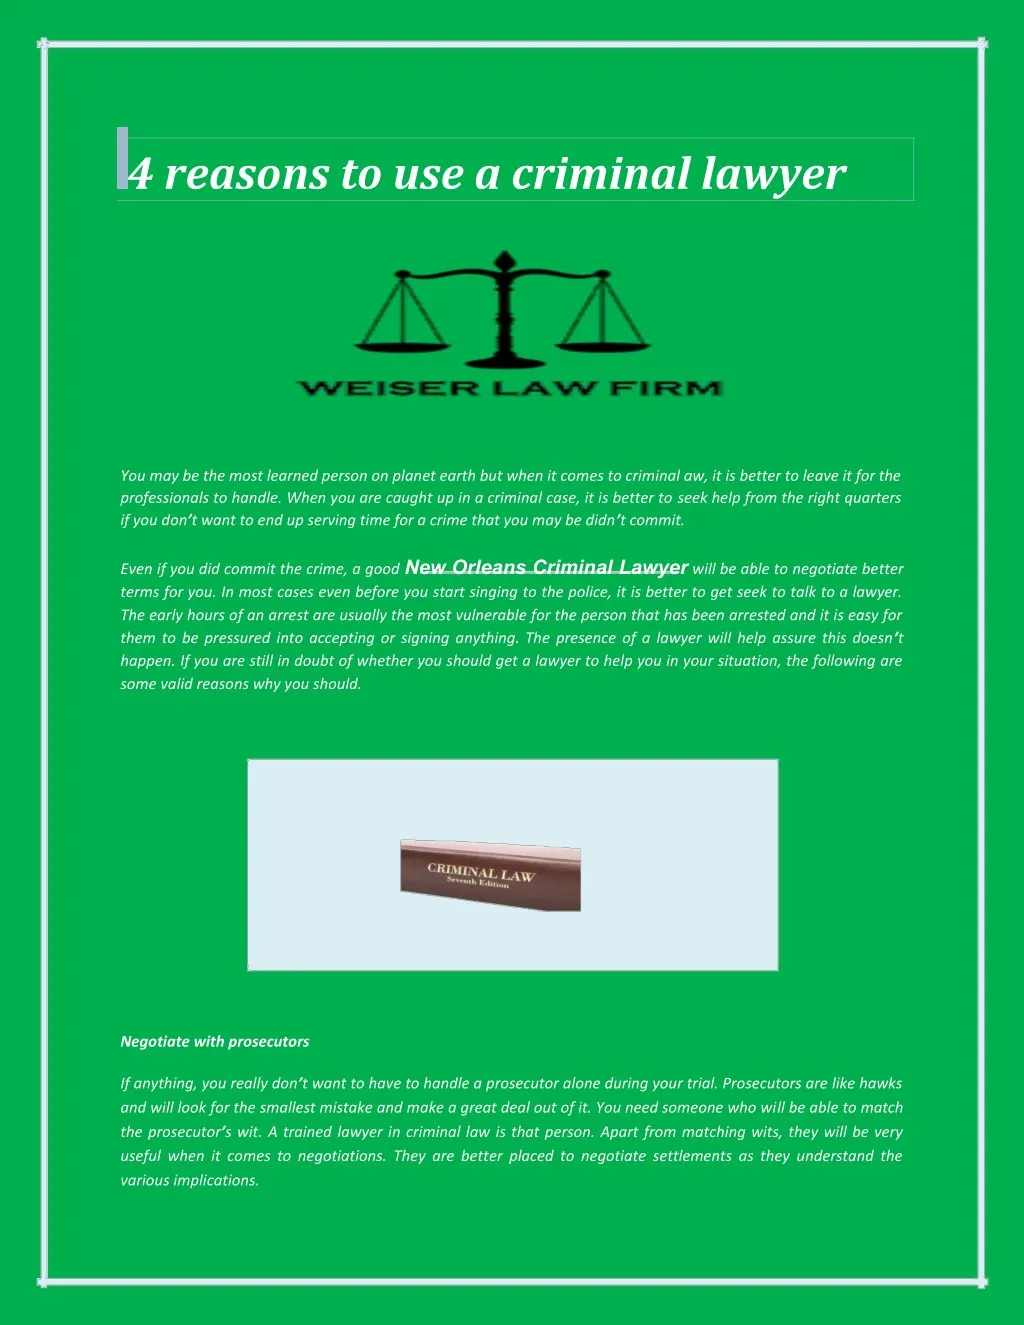 4 reasons to use a criminal lawyer